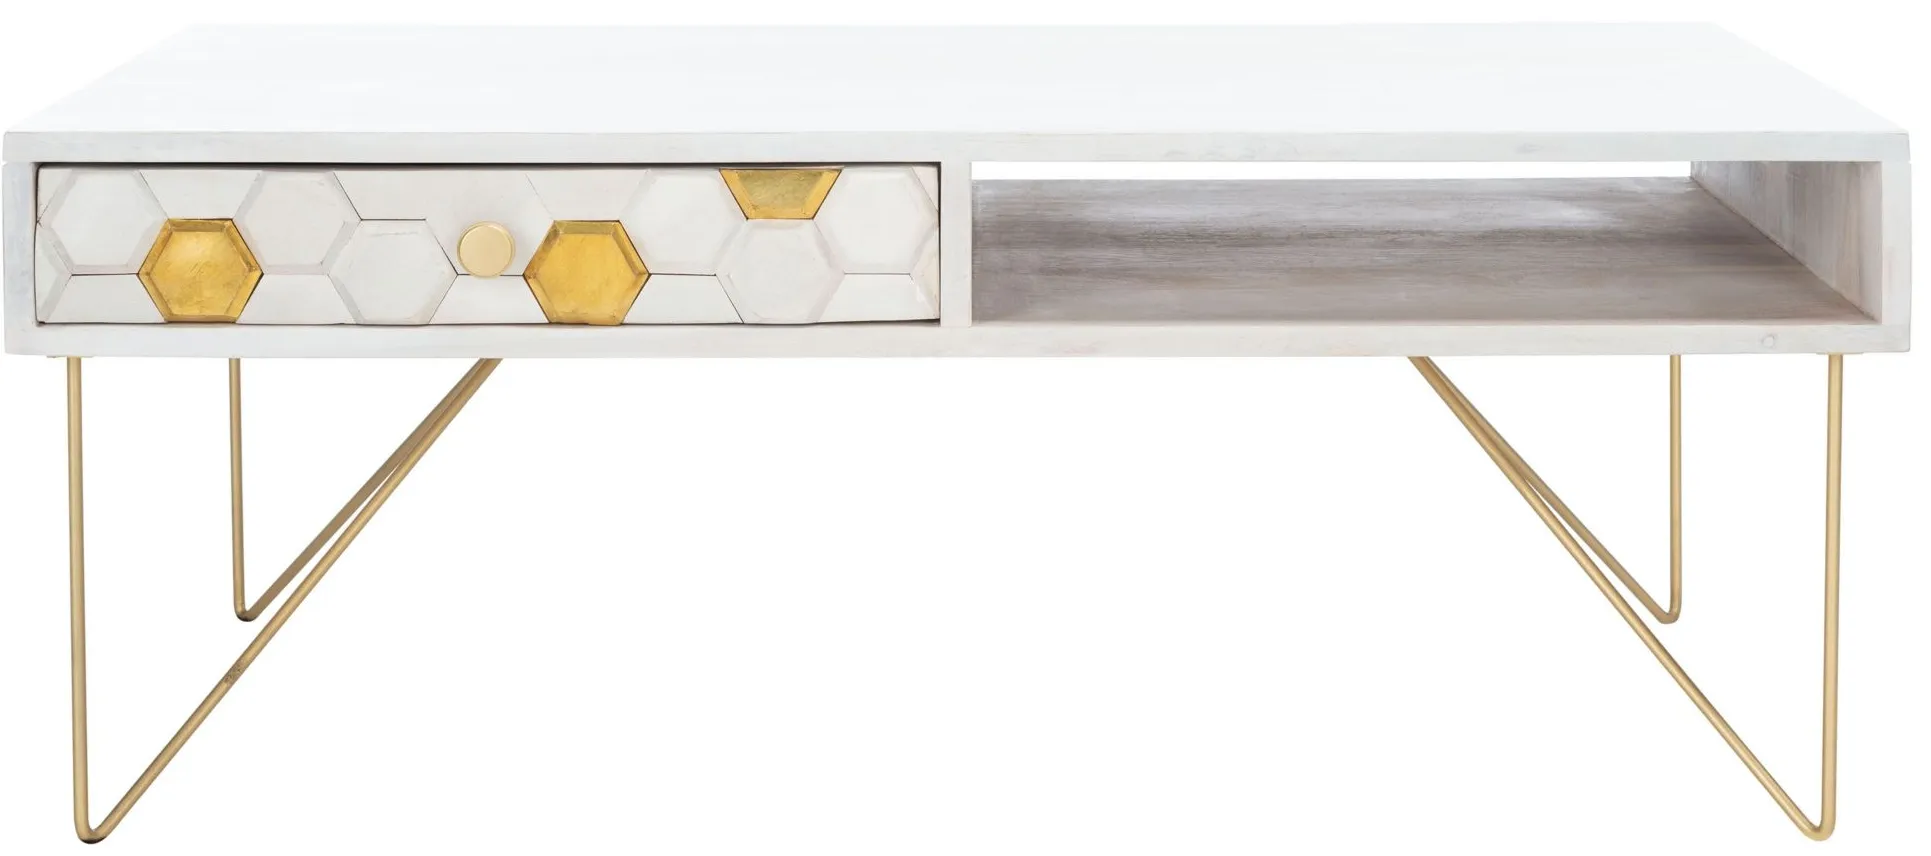 Arthur Coffee Table in White Wash with Gold Accent by Safavieh